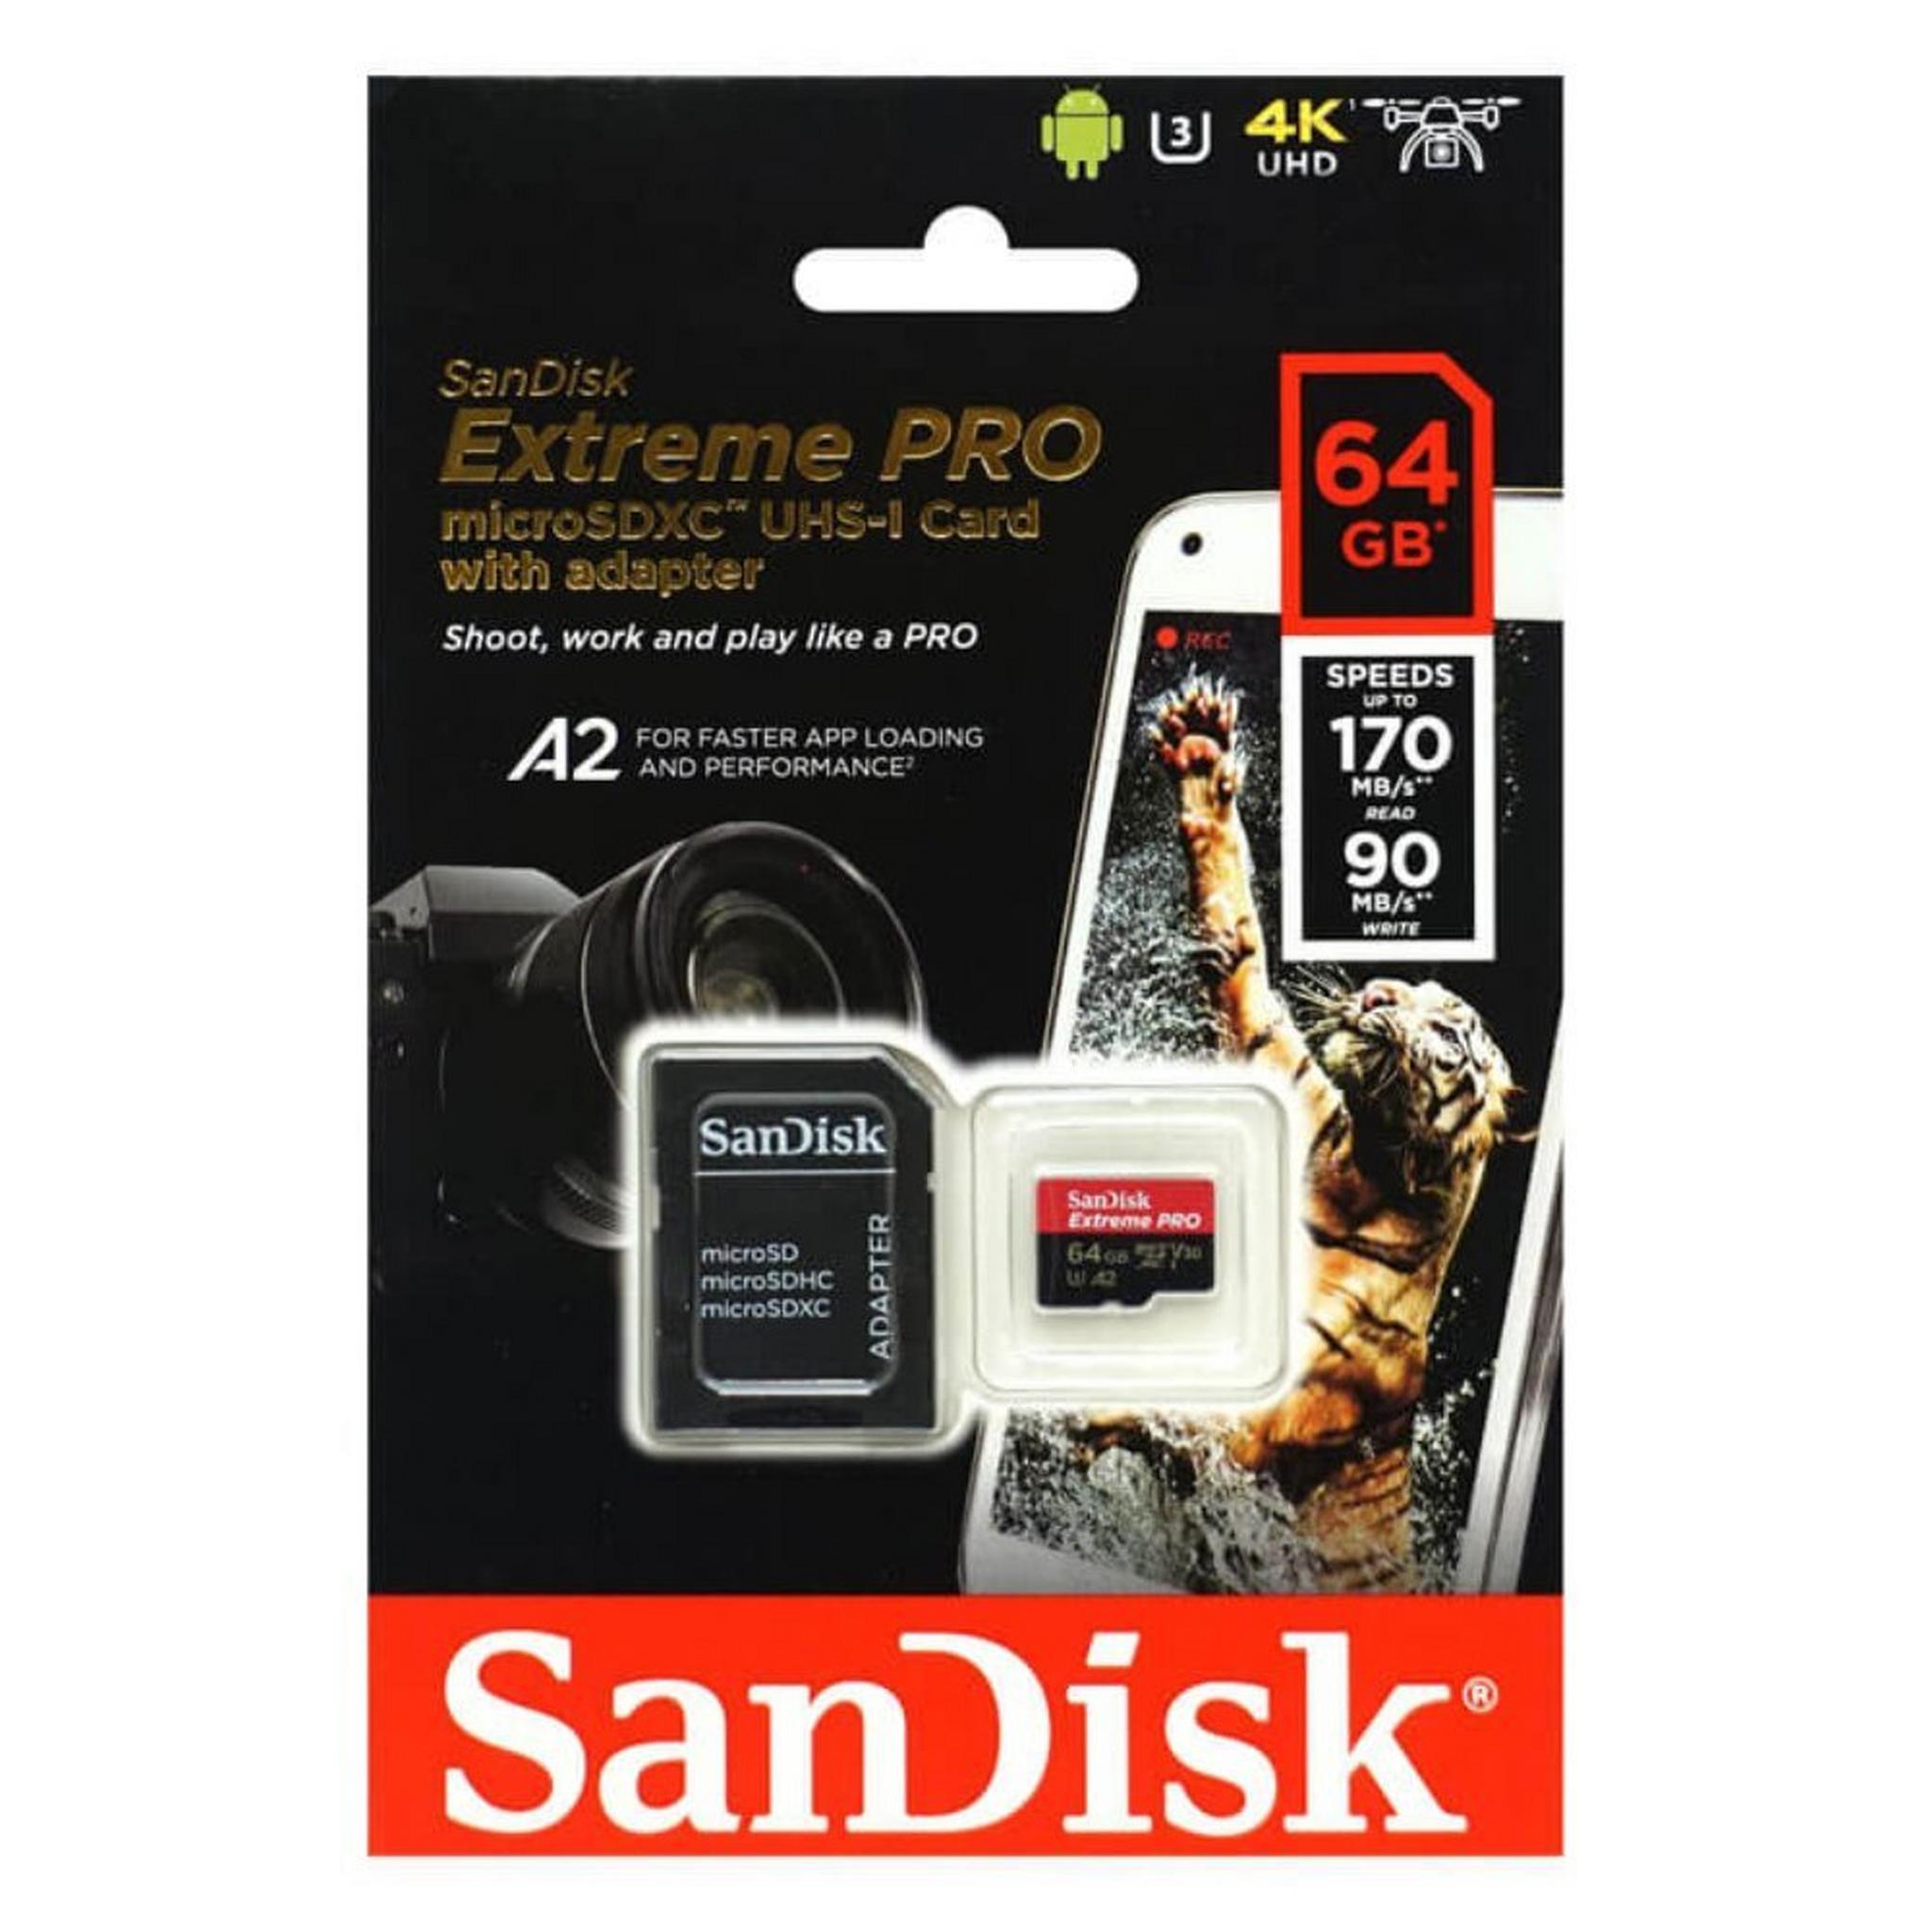 SanDisk Extreme Pro microSD UHS I Card 64GB 200MB/s Read, 90MB/s write.